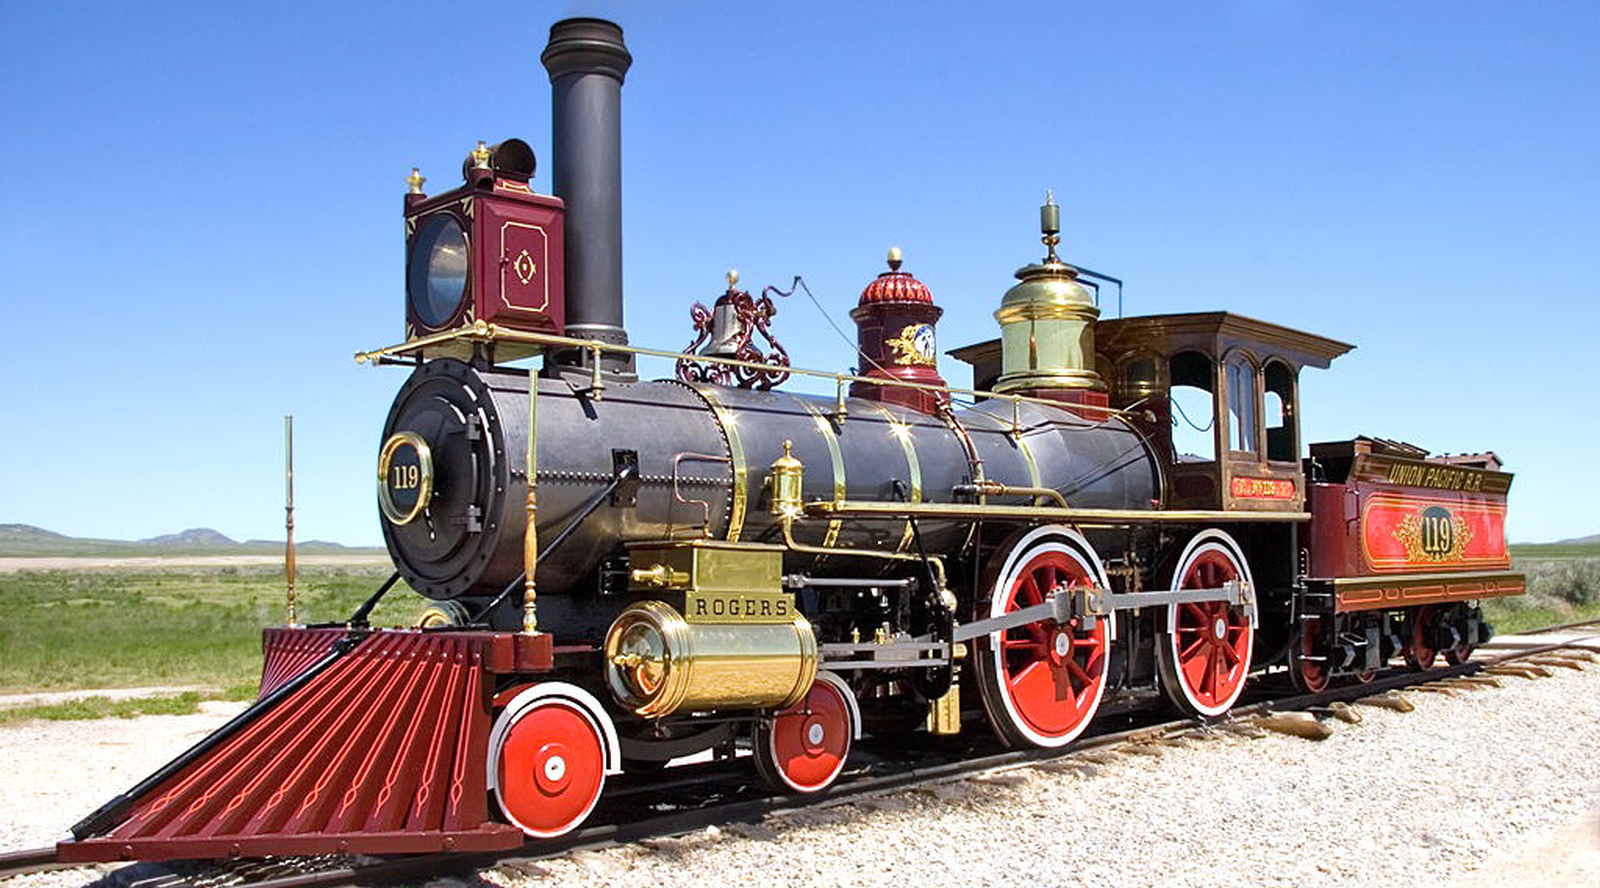 The replica at the Golden Spike National Historic Site at Promontory Summit in Utah